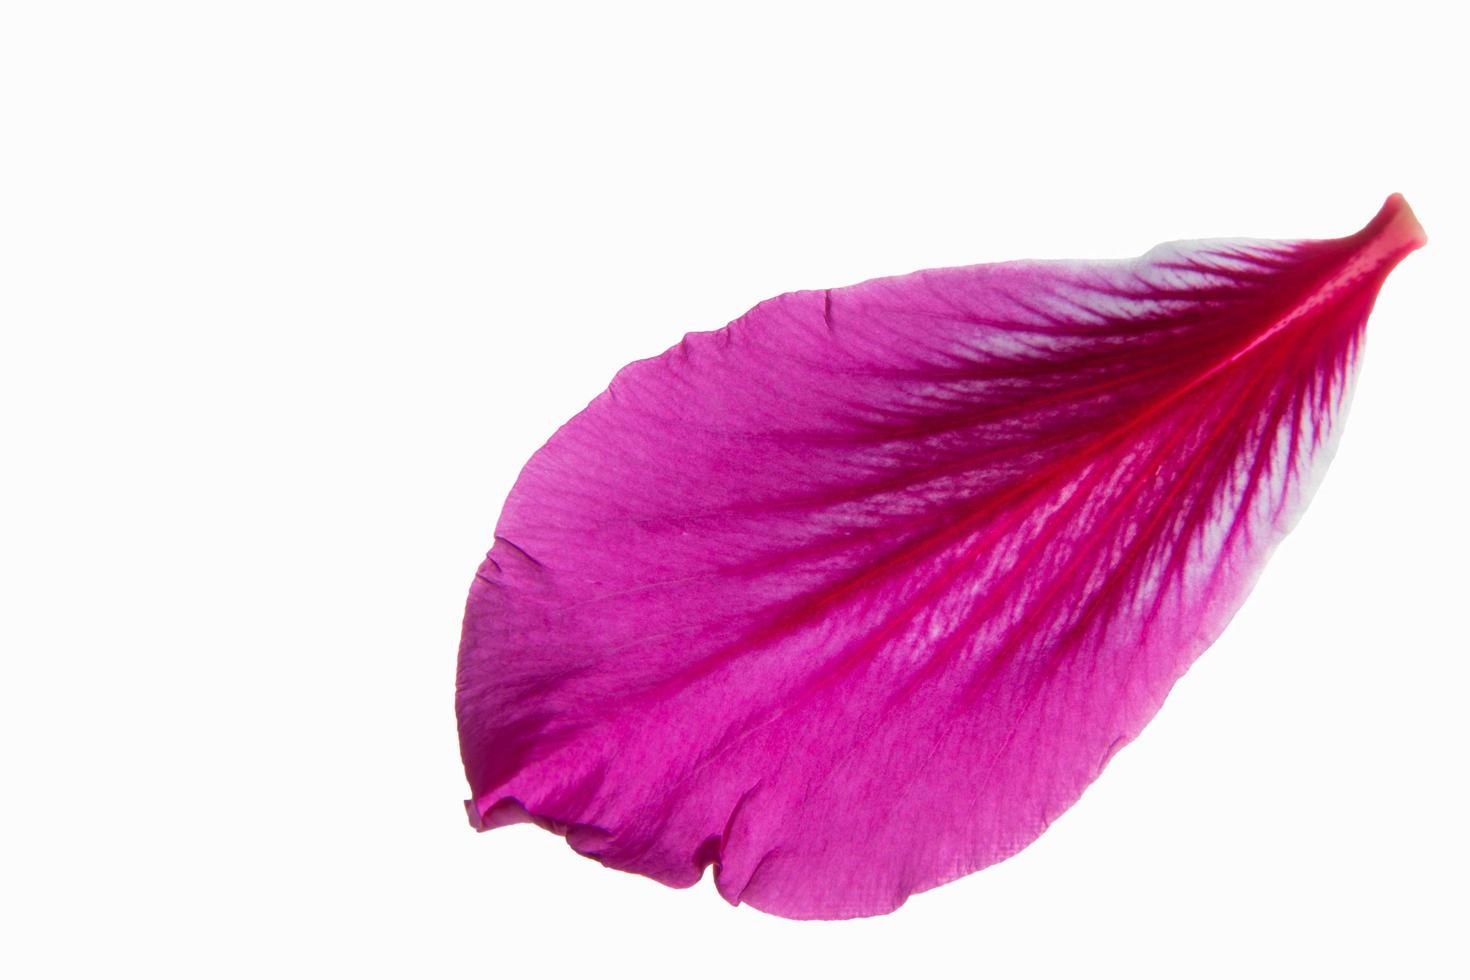 Pink flower petal on white background photo